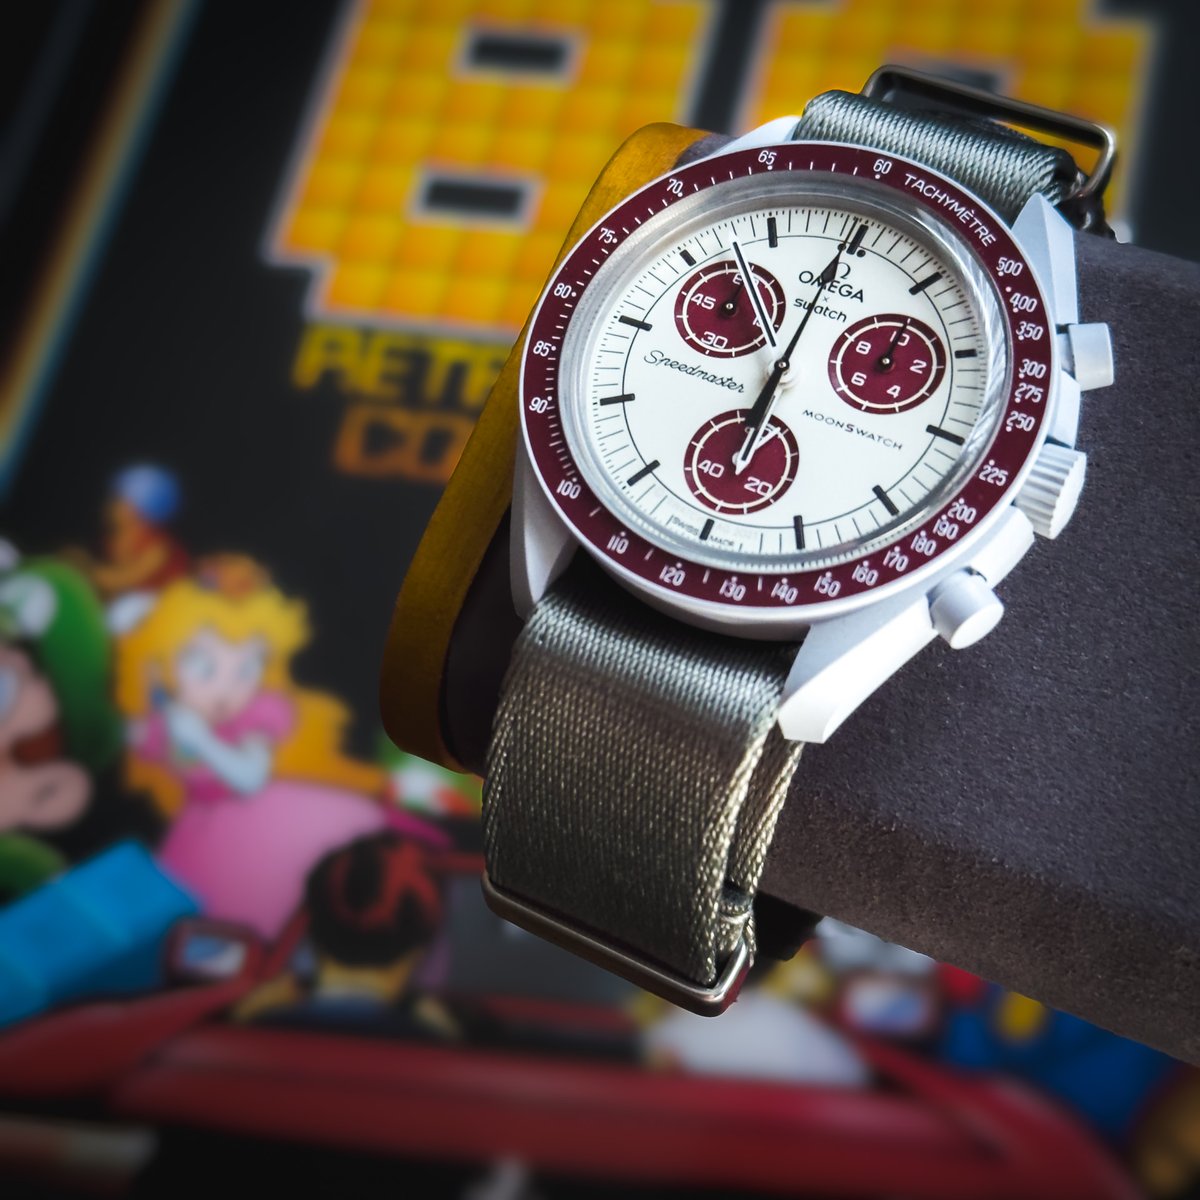 🕒 It’s #SpeedyTuesday, folks! Flaunting the Omega MoonSwatch with its retro vibe and burgundy touches against a backdrop of classic ‘80s arcade nostalgia.
#Omega #MoonSwatch #WatchOfTheDay #VintageStyle #speedmaster #pws #planetwatchstraps #ClassicArcade #RetroGaming #watchfam